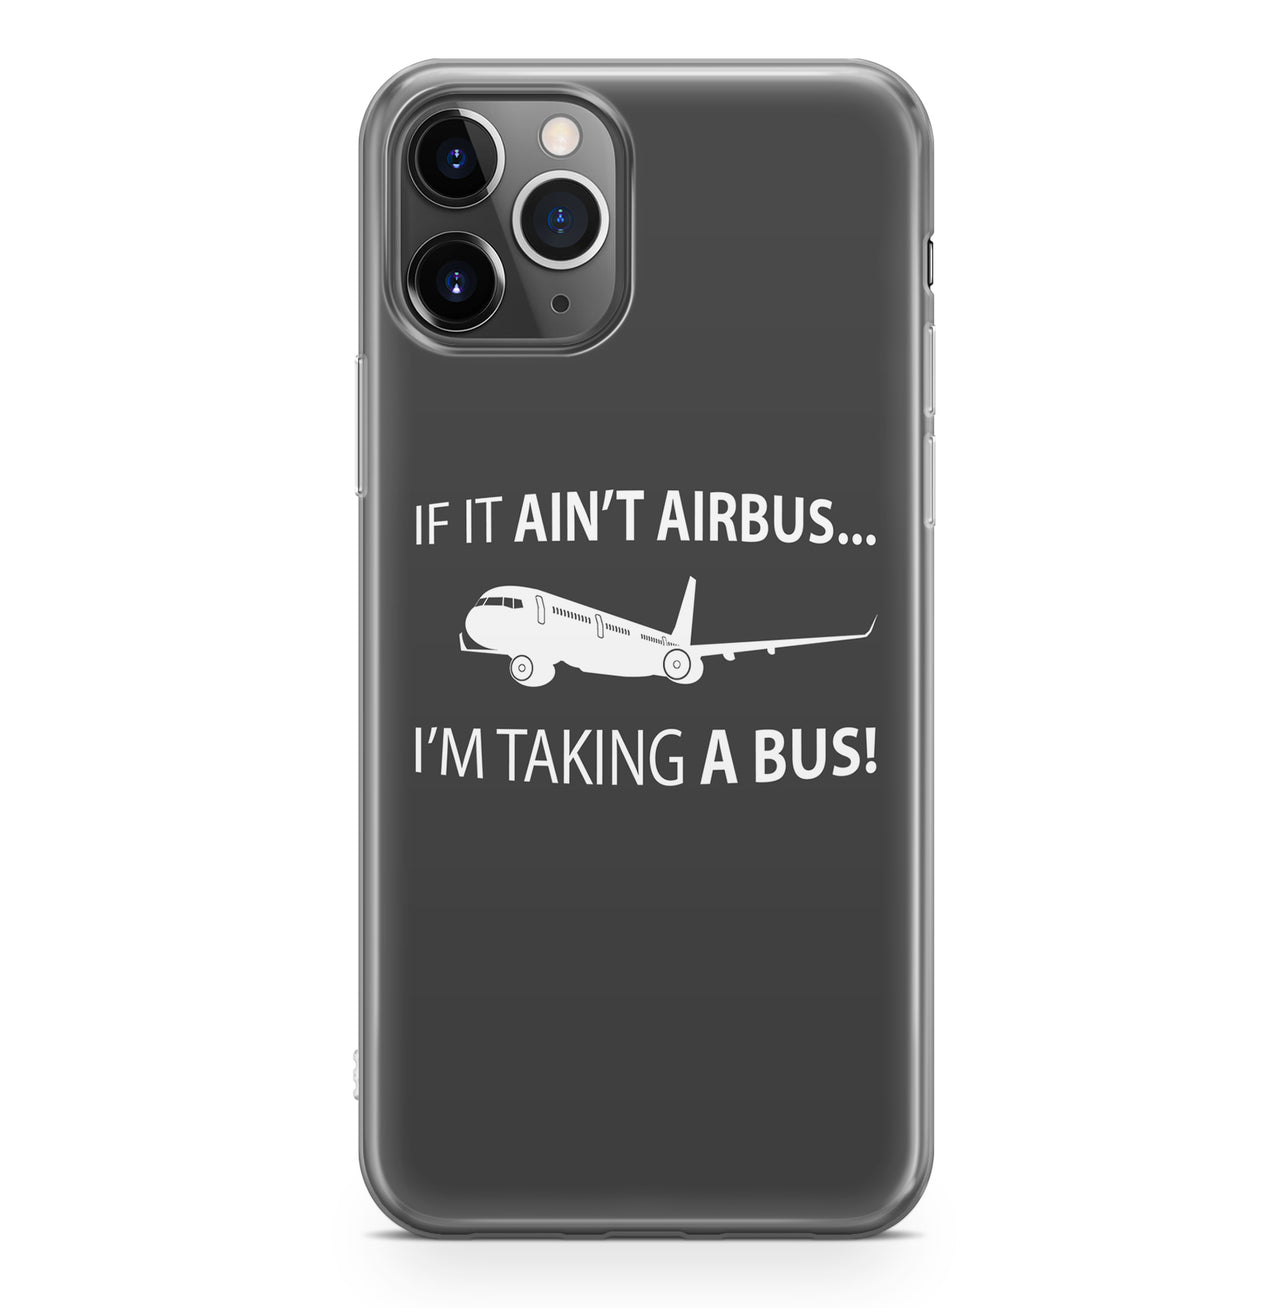 If It Ain't Airbus I'm Taking A Bus Designed iPhone Cases